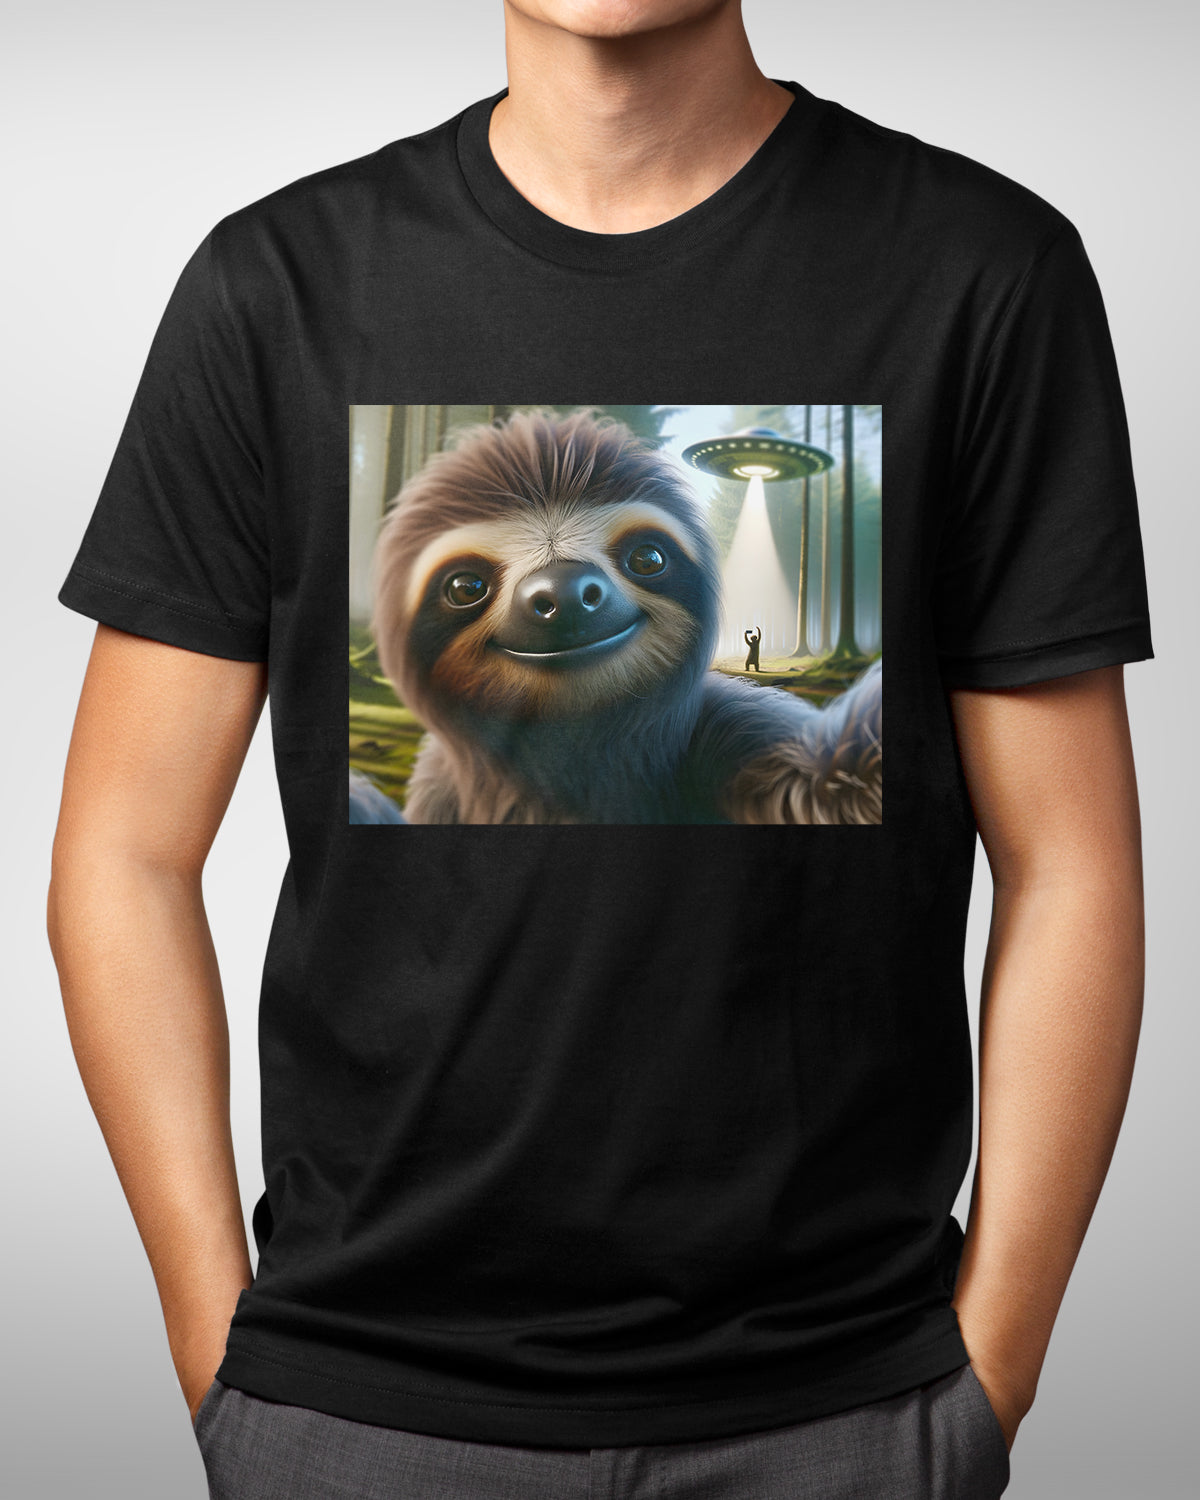 Quirky Sloth UFO Shirt, Perfect for Science Geeks & Outdoor Enthusiasts - Funny Camping Sloth Lover Shirt